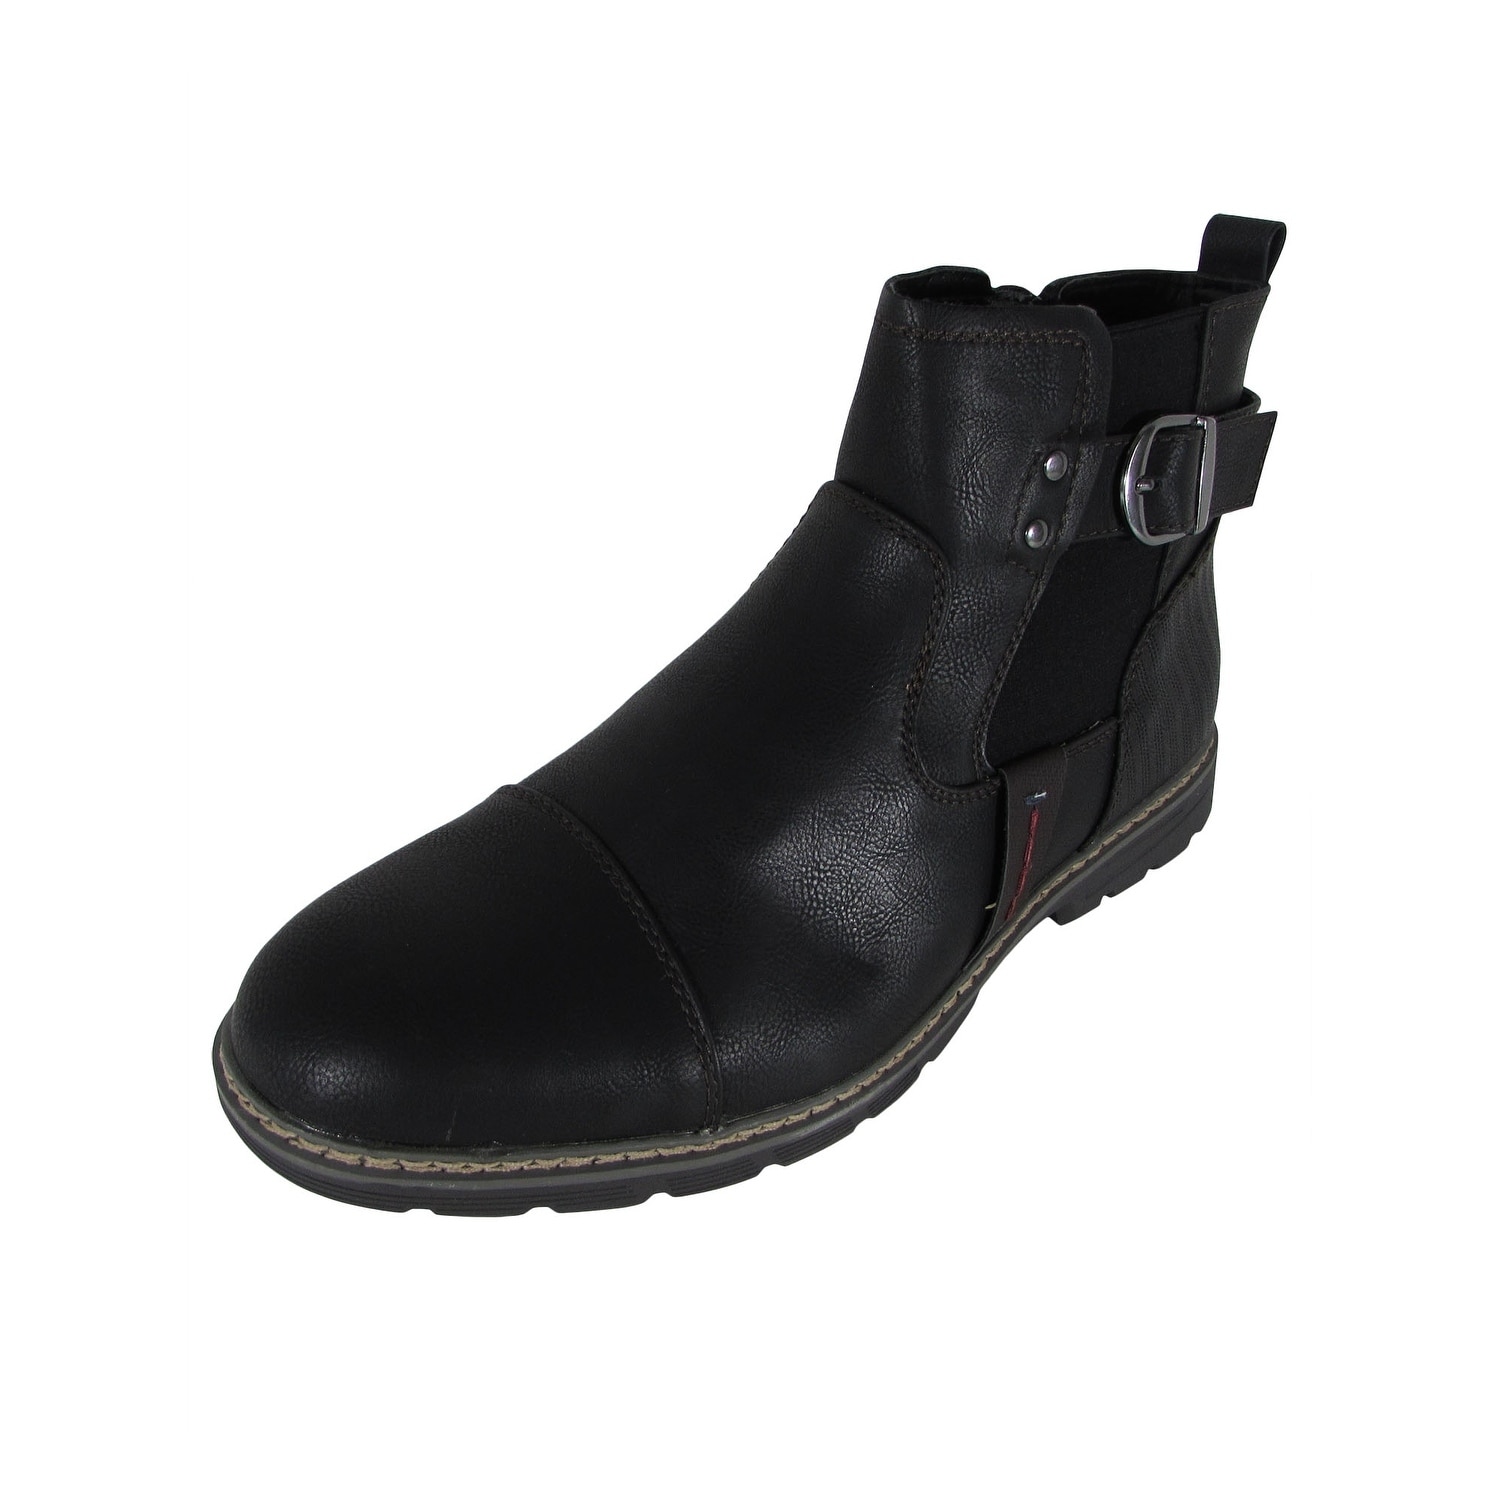 Day Five Mens Casual Zip Up Chelsea Boot Shoes, Black, US 10 - image 2 of 4